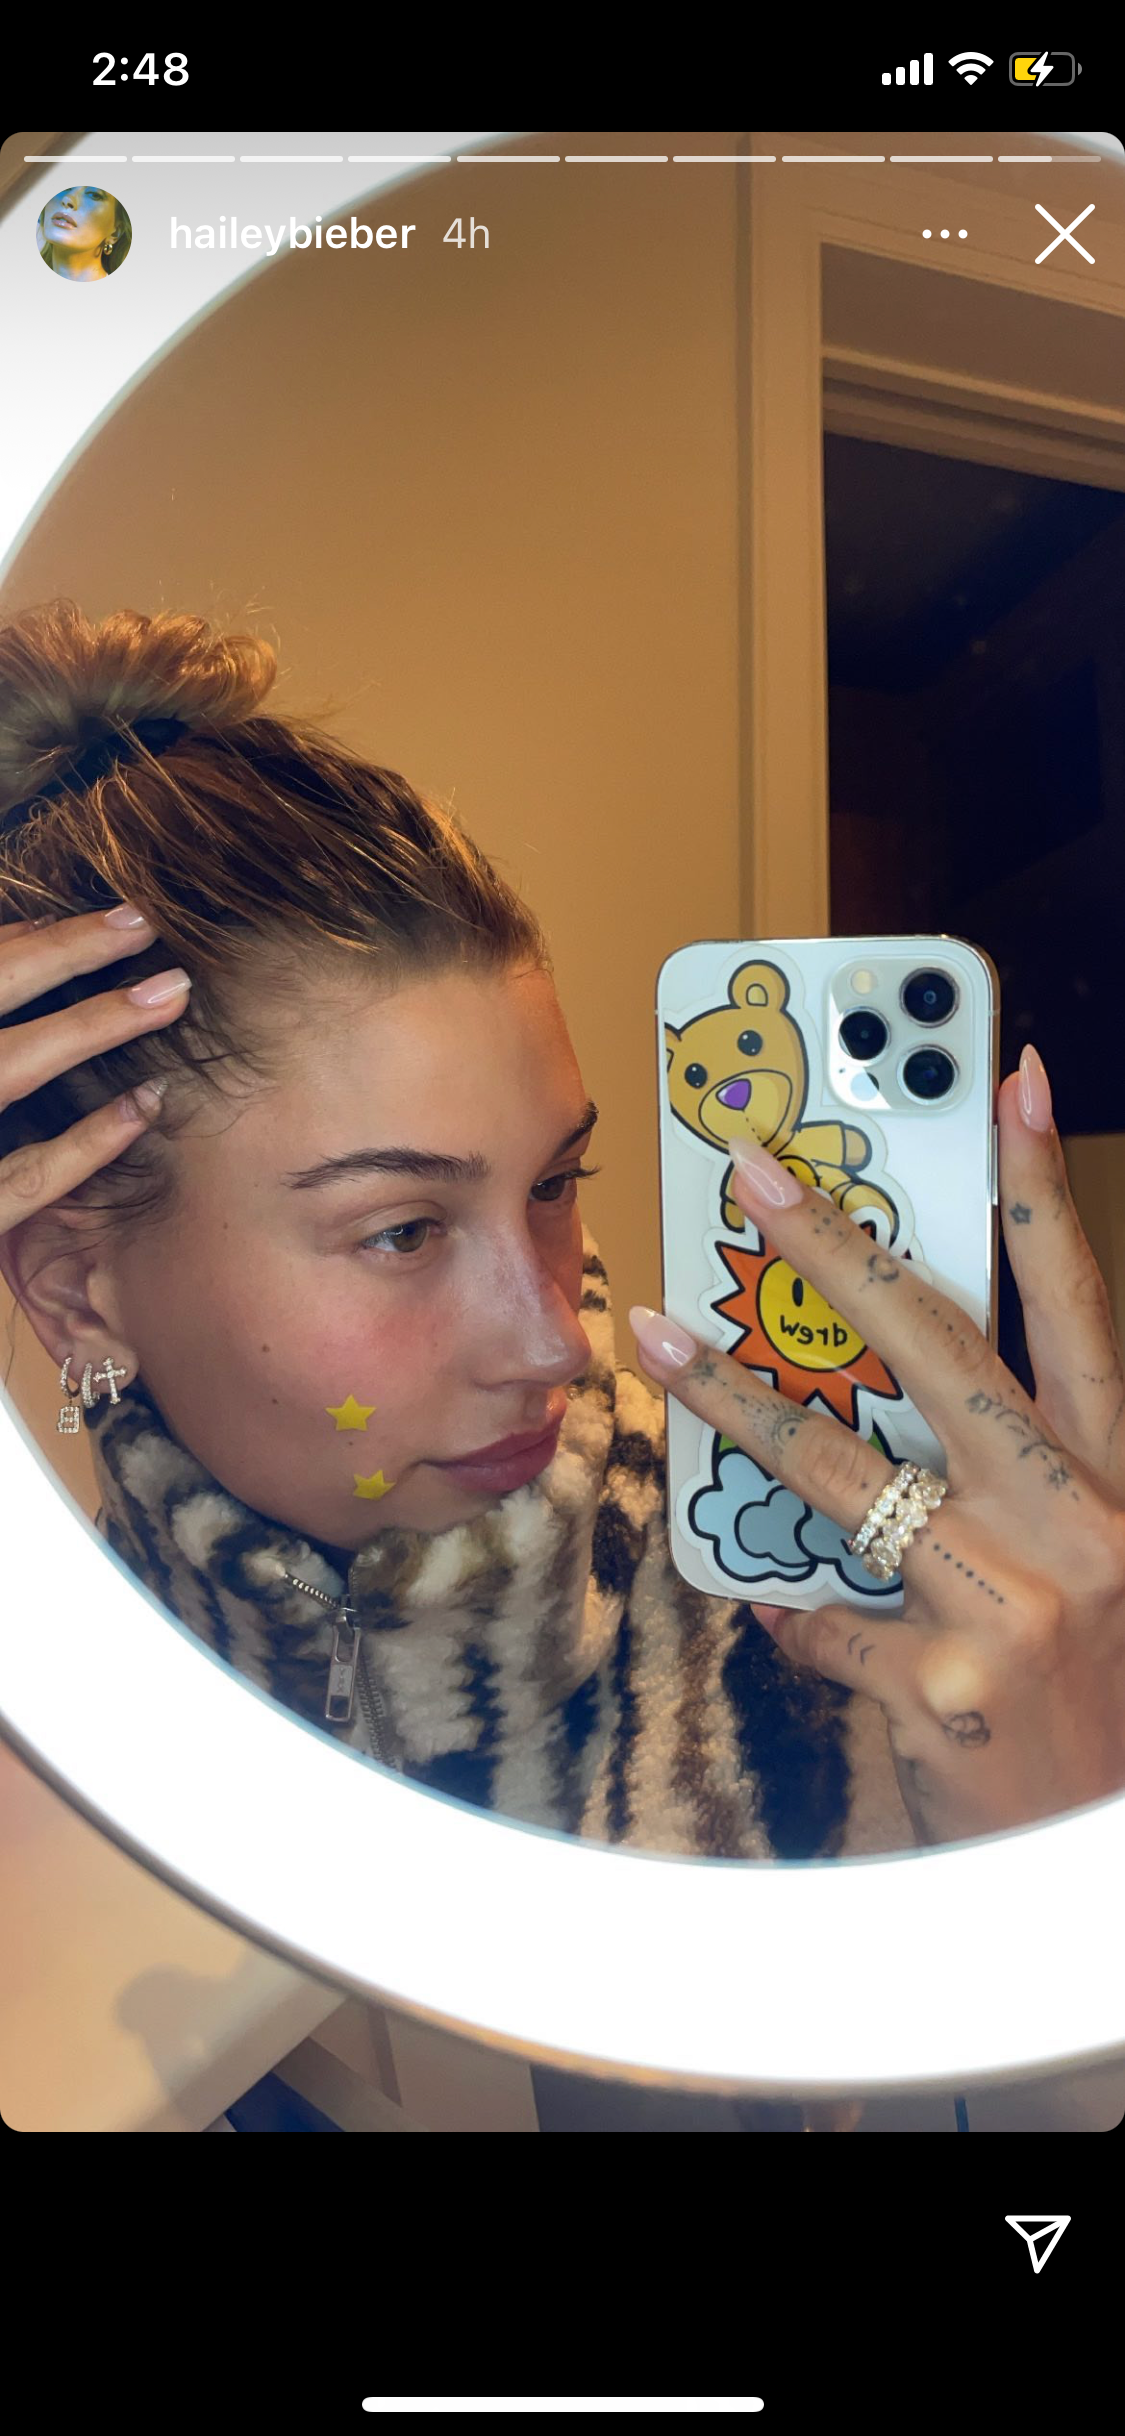 Even Hailey Bieber Wears Pimple Stickers & You Can Shop the Same Cute Ones RN